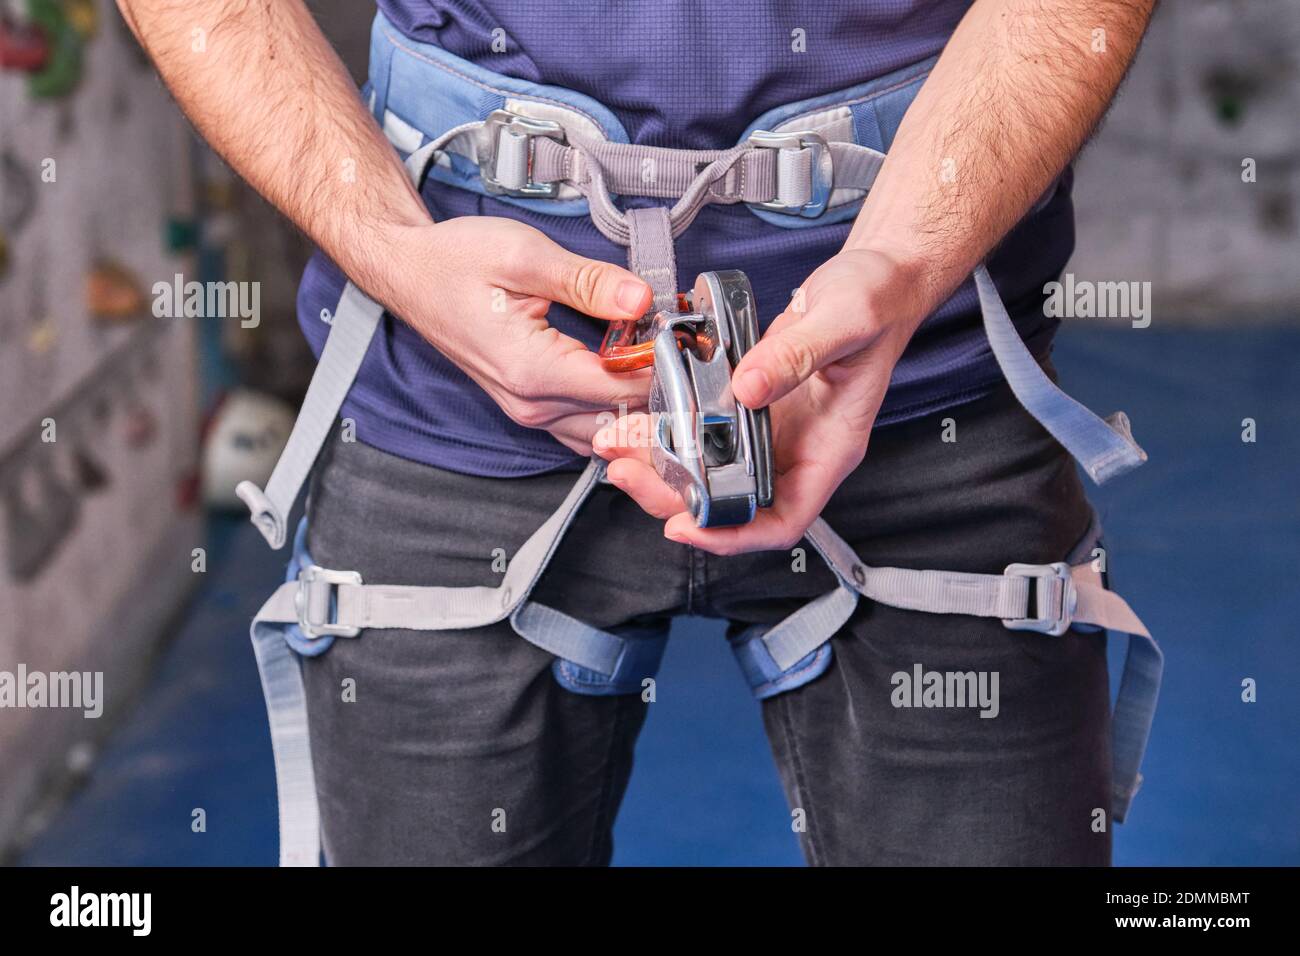 Close-up of climber with climbing equipment, tying snap hook on